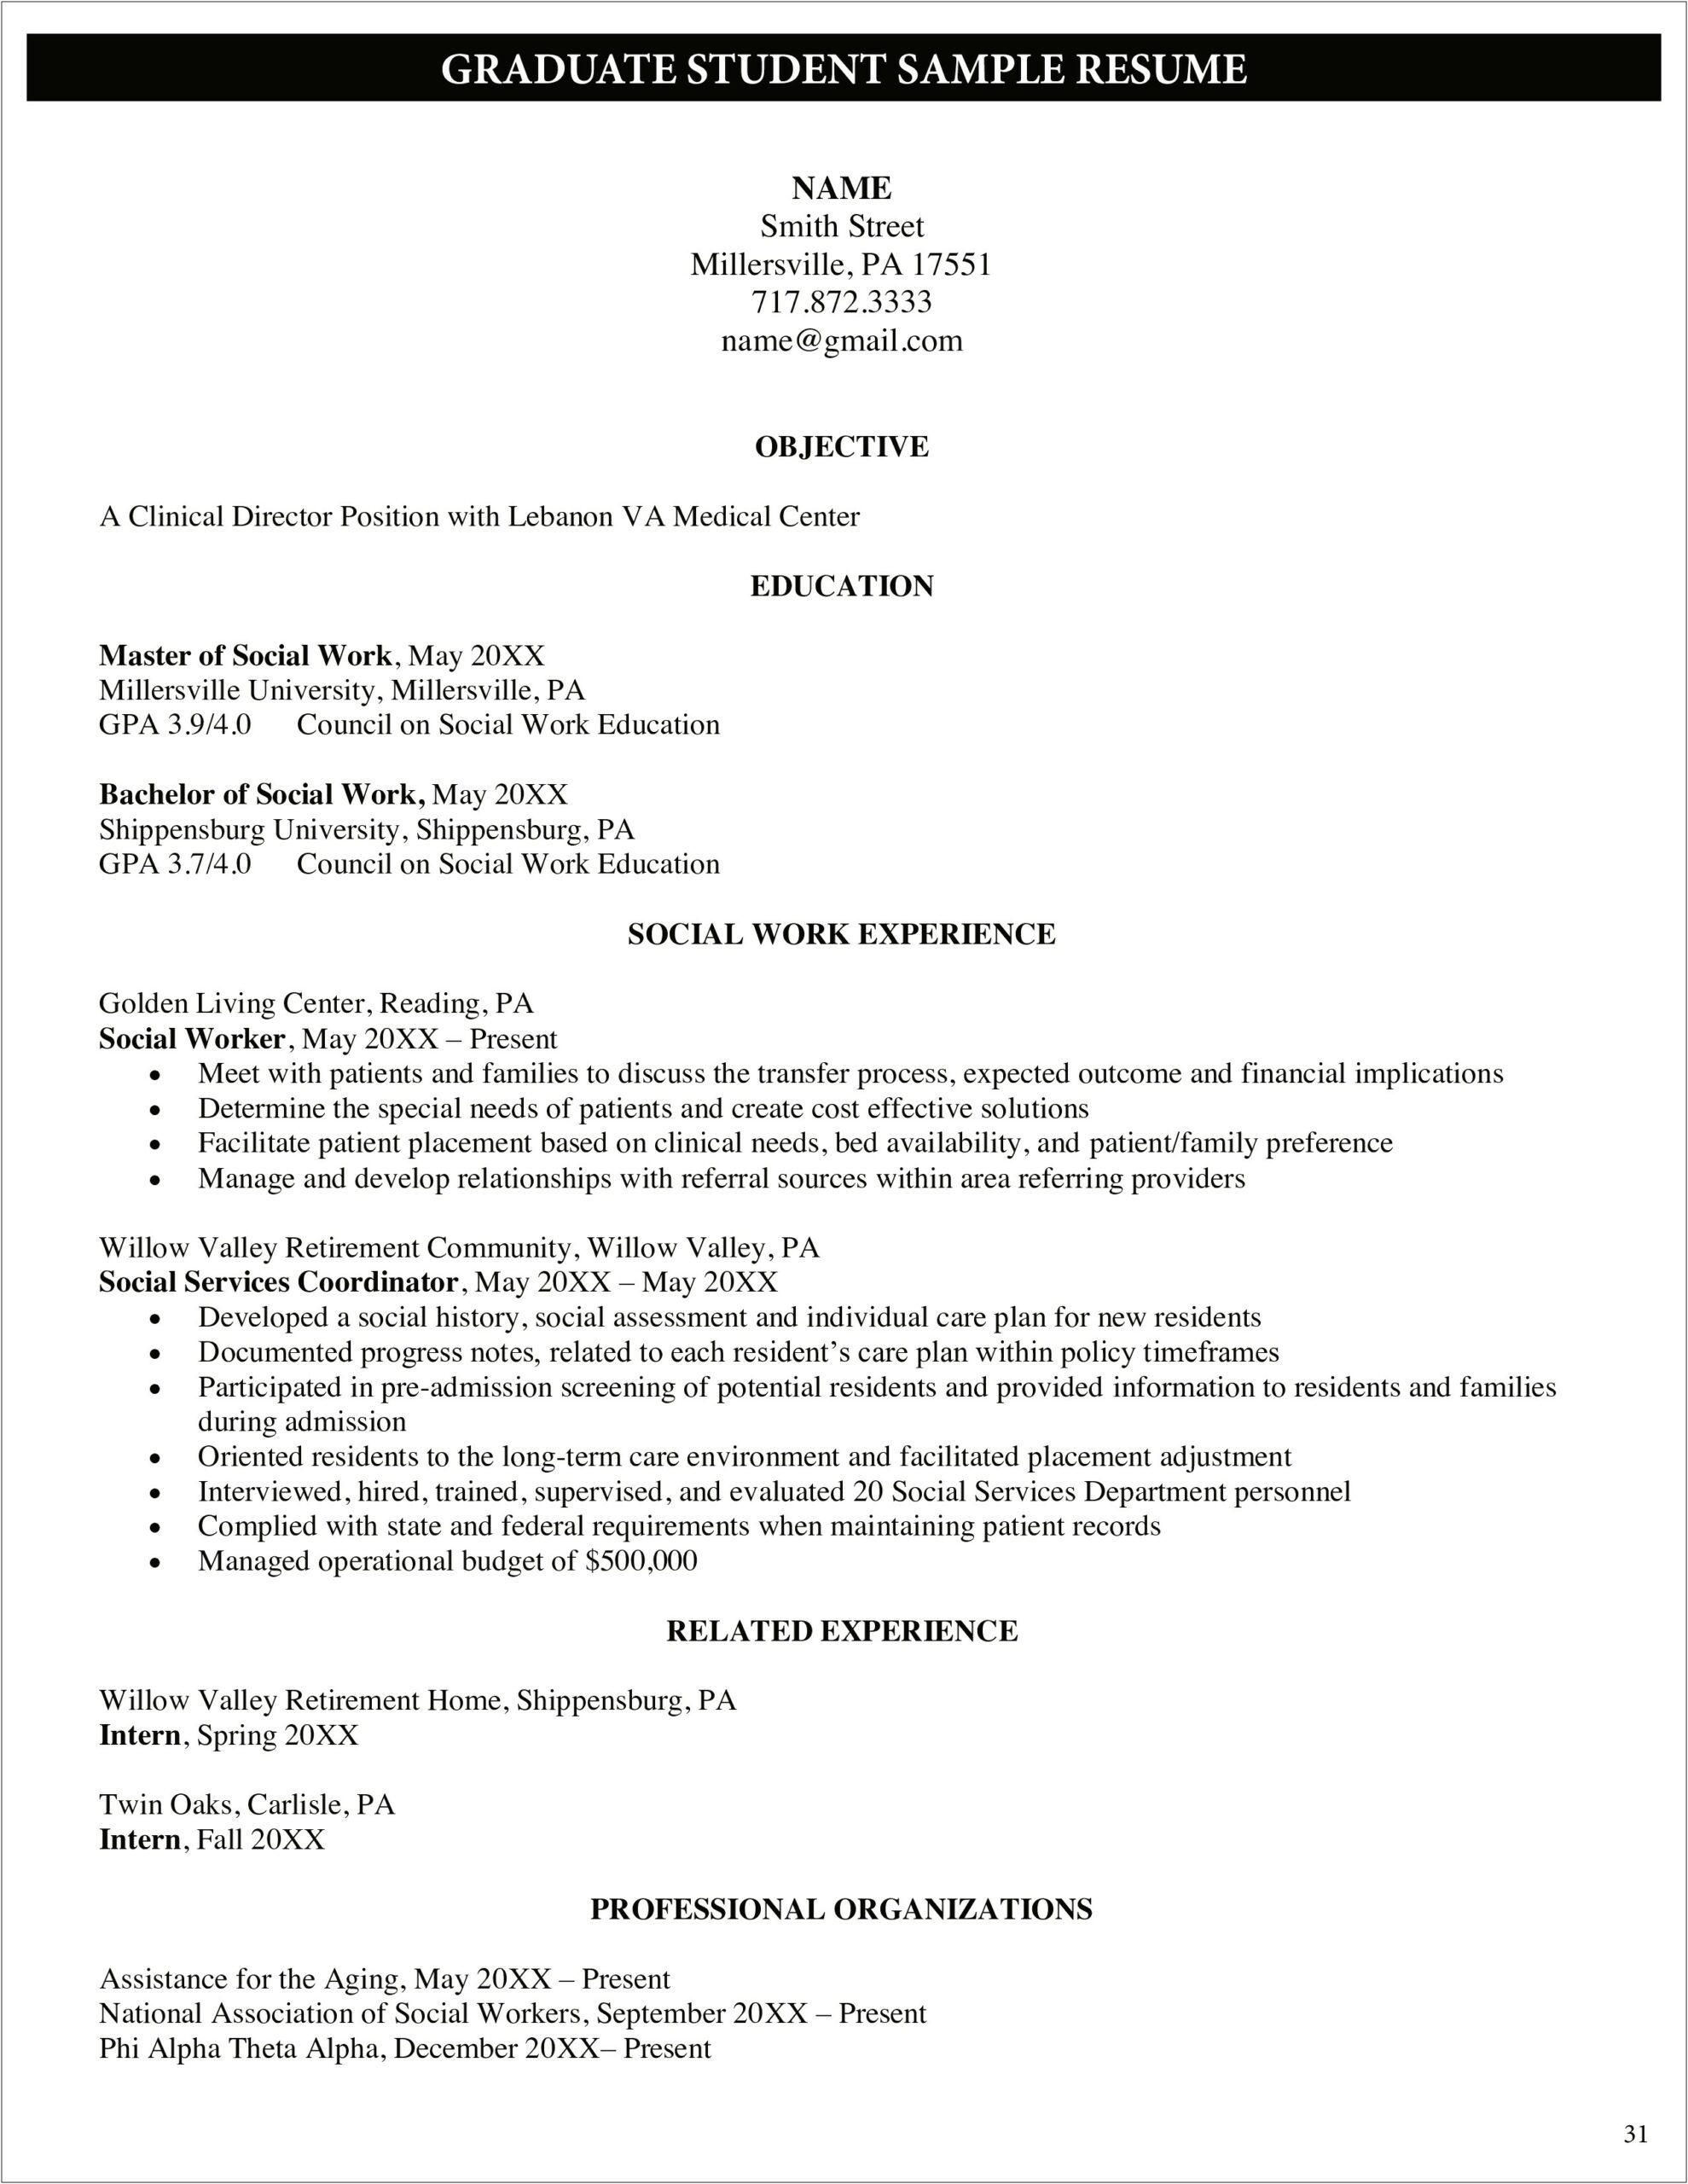 Examples Of Graduate School Objective For Resume